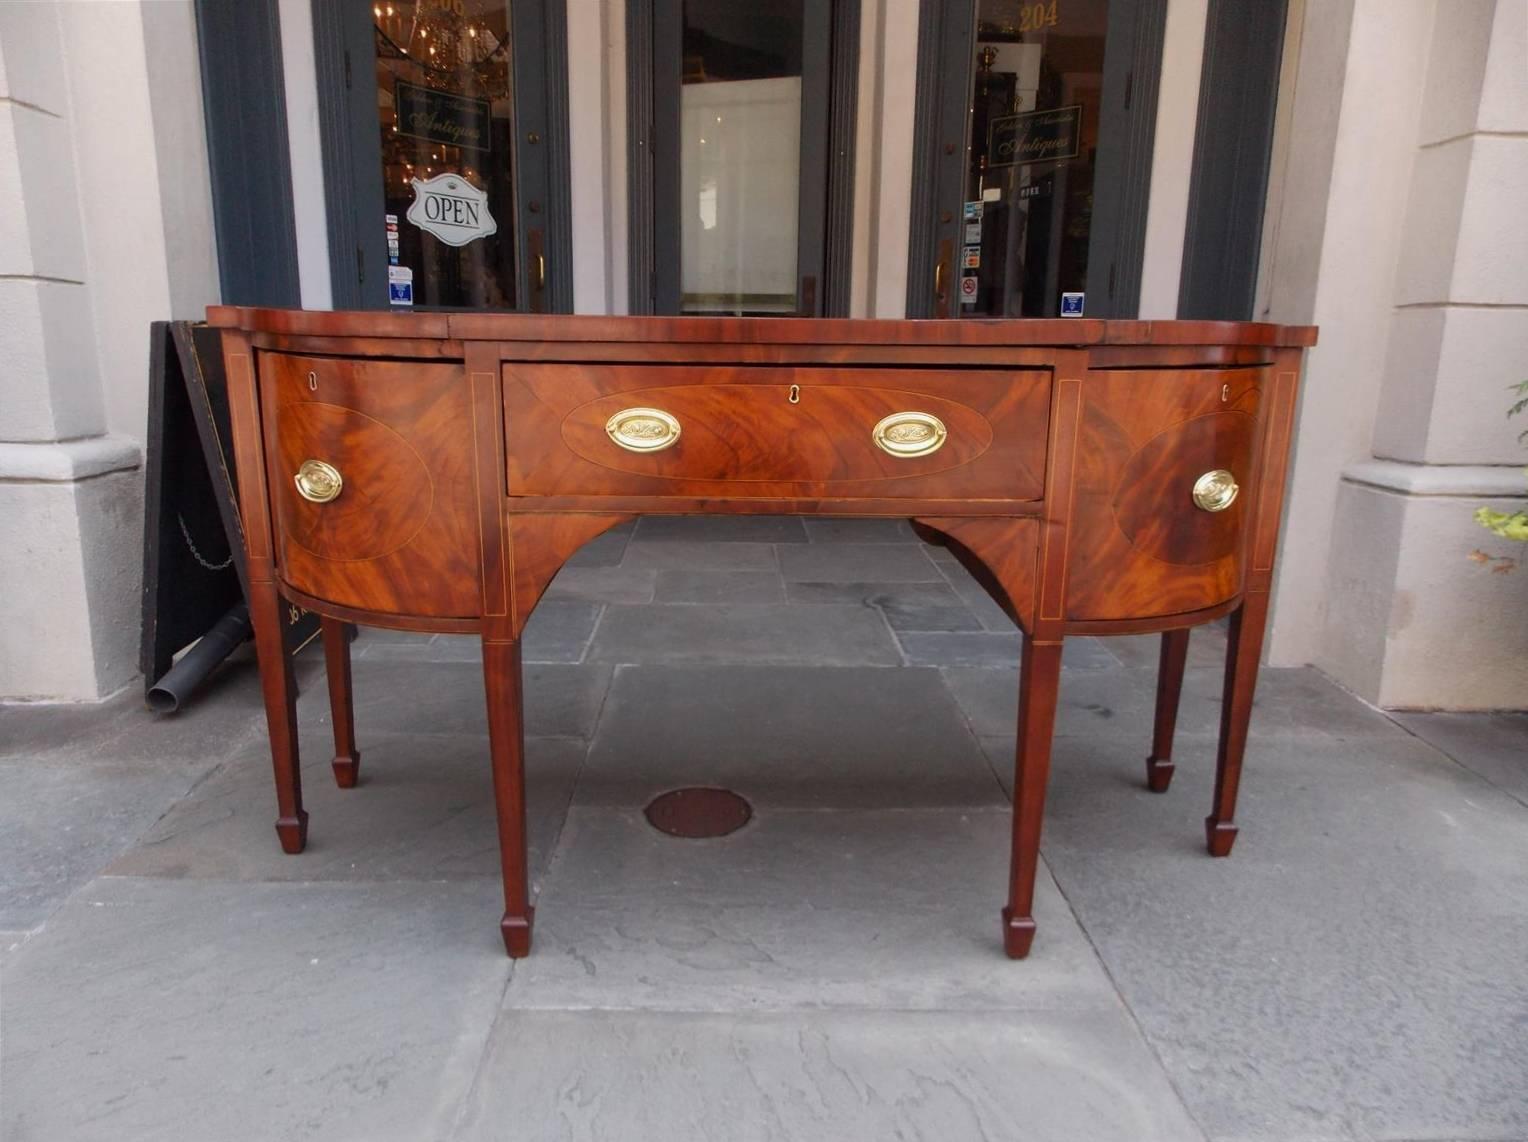 English Hepplewhite mahogany bow front cross banded sideboard with a carved molded edge top, central drawer with flanking cabinet doors, oval satinwood string inlays,  period brasses, and terminating on tapered squared legs with spade feet, Late